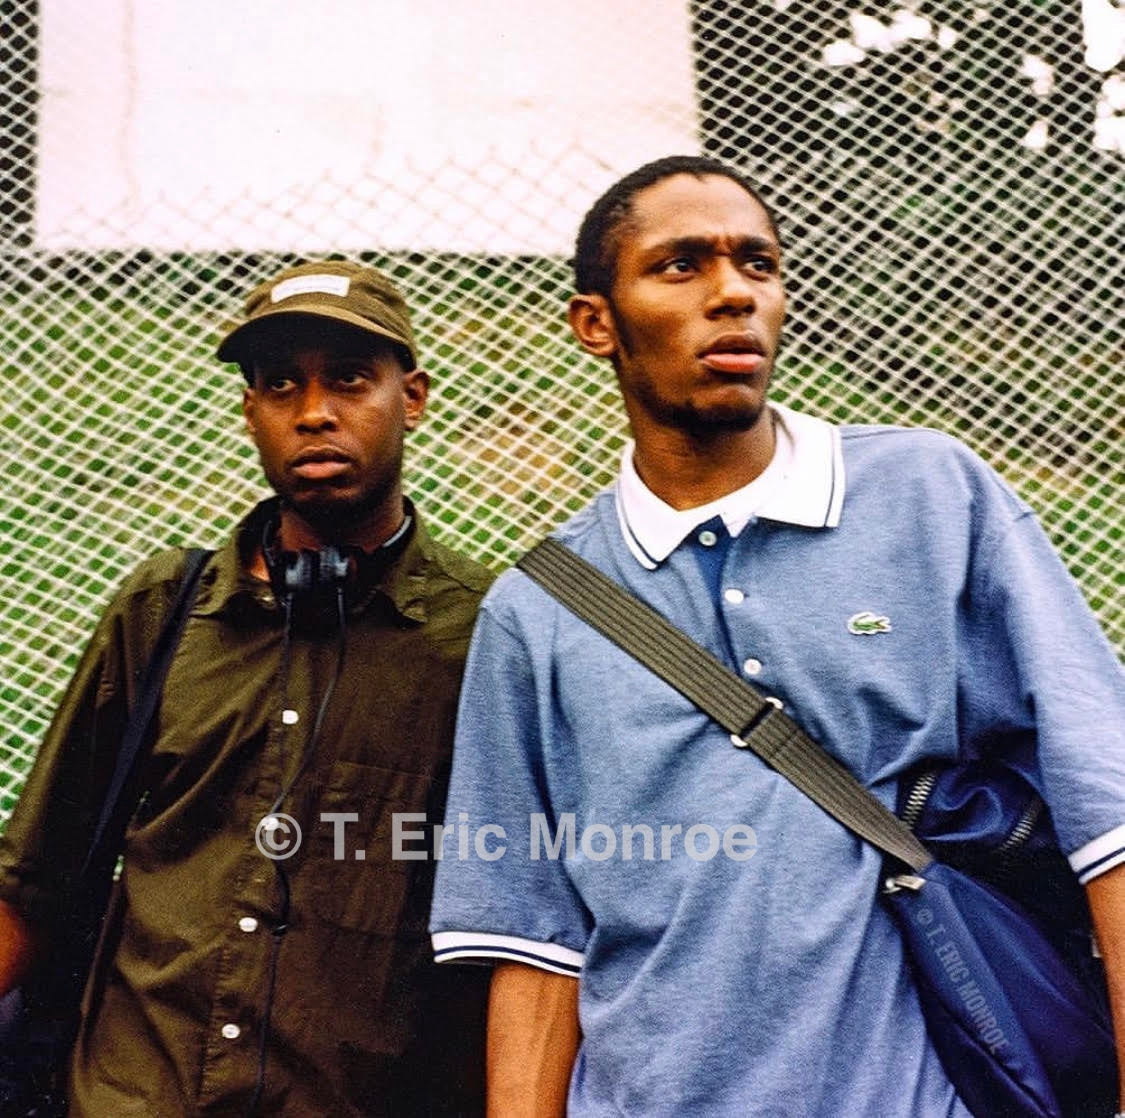 The Moment: Mos Def & Talib Kweli, Get By-T Dot Eric